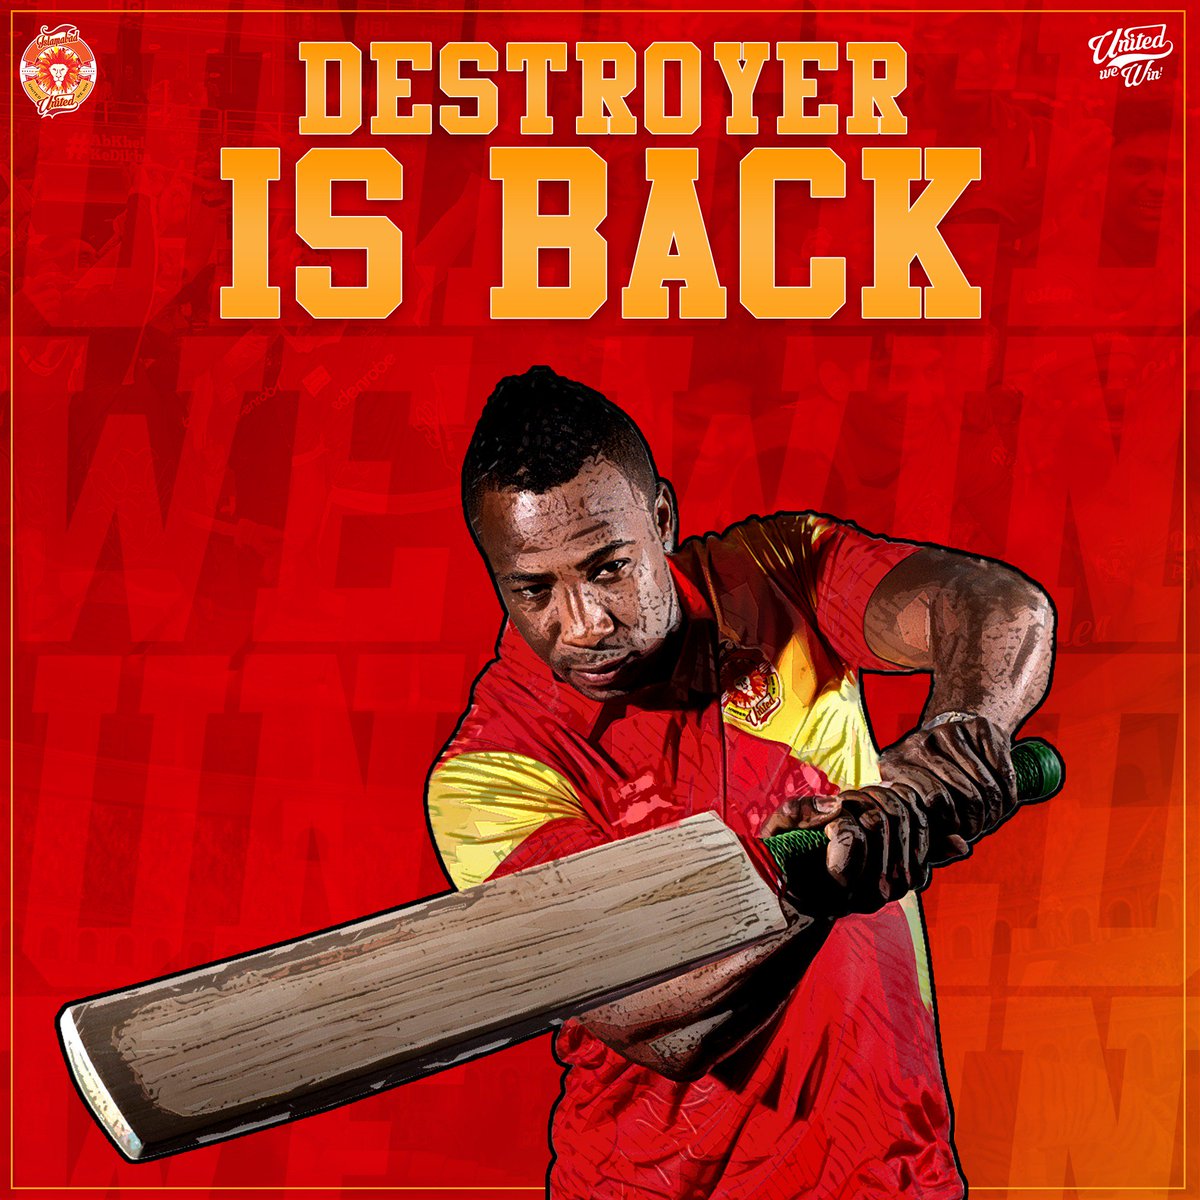 #DESTROYER IS BACK! @Russell12A is back for #HBLPSL 3! Are you ready to see him back in action? #UnitedWeWin #SherKiDhaar #DimaghSe